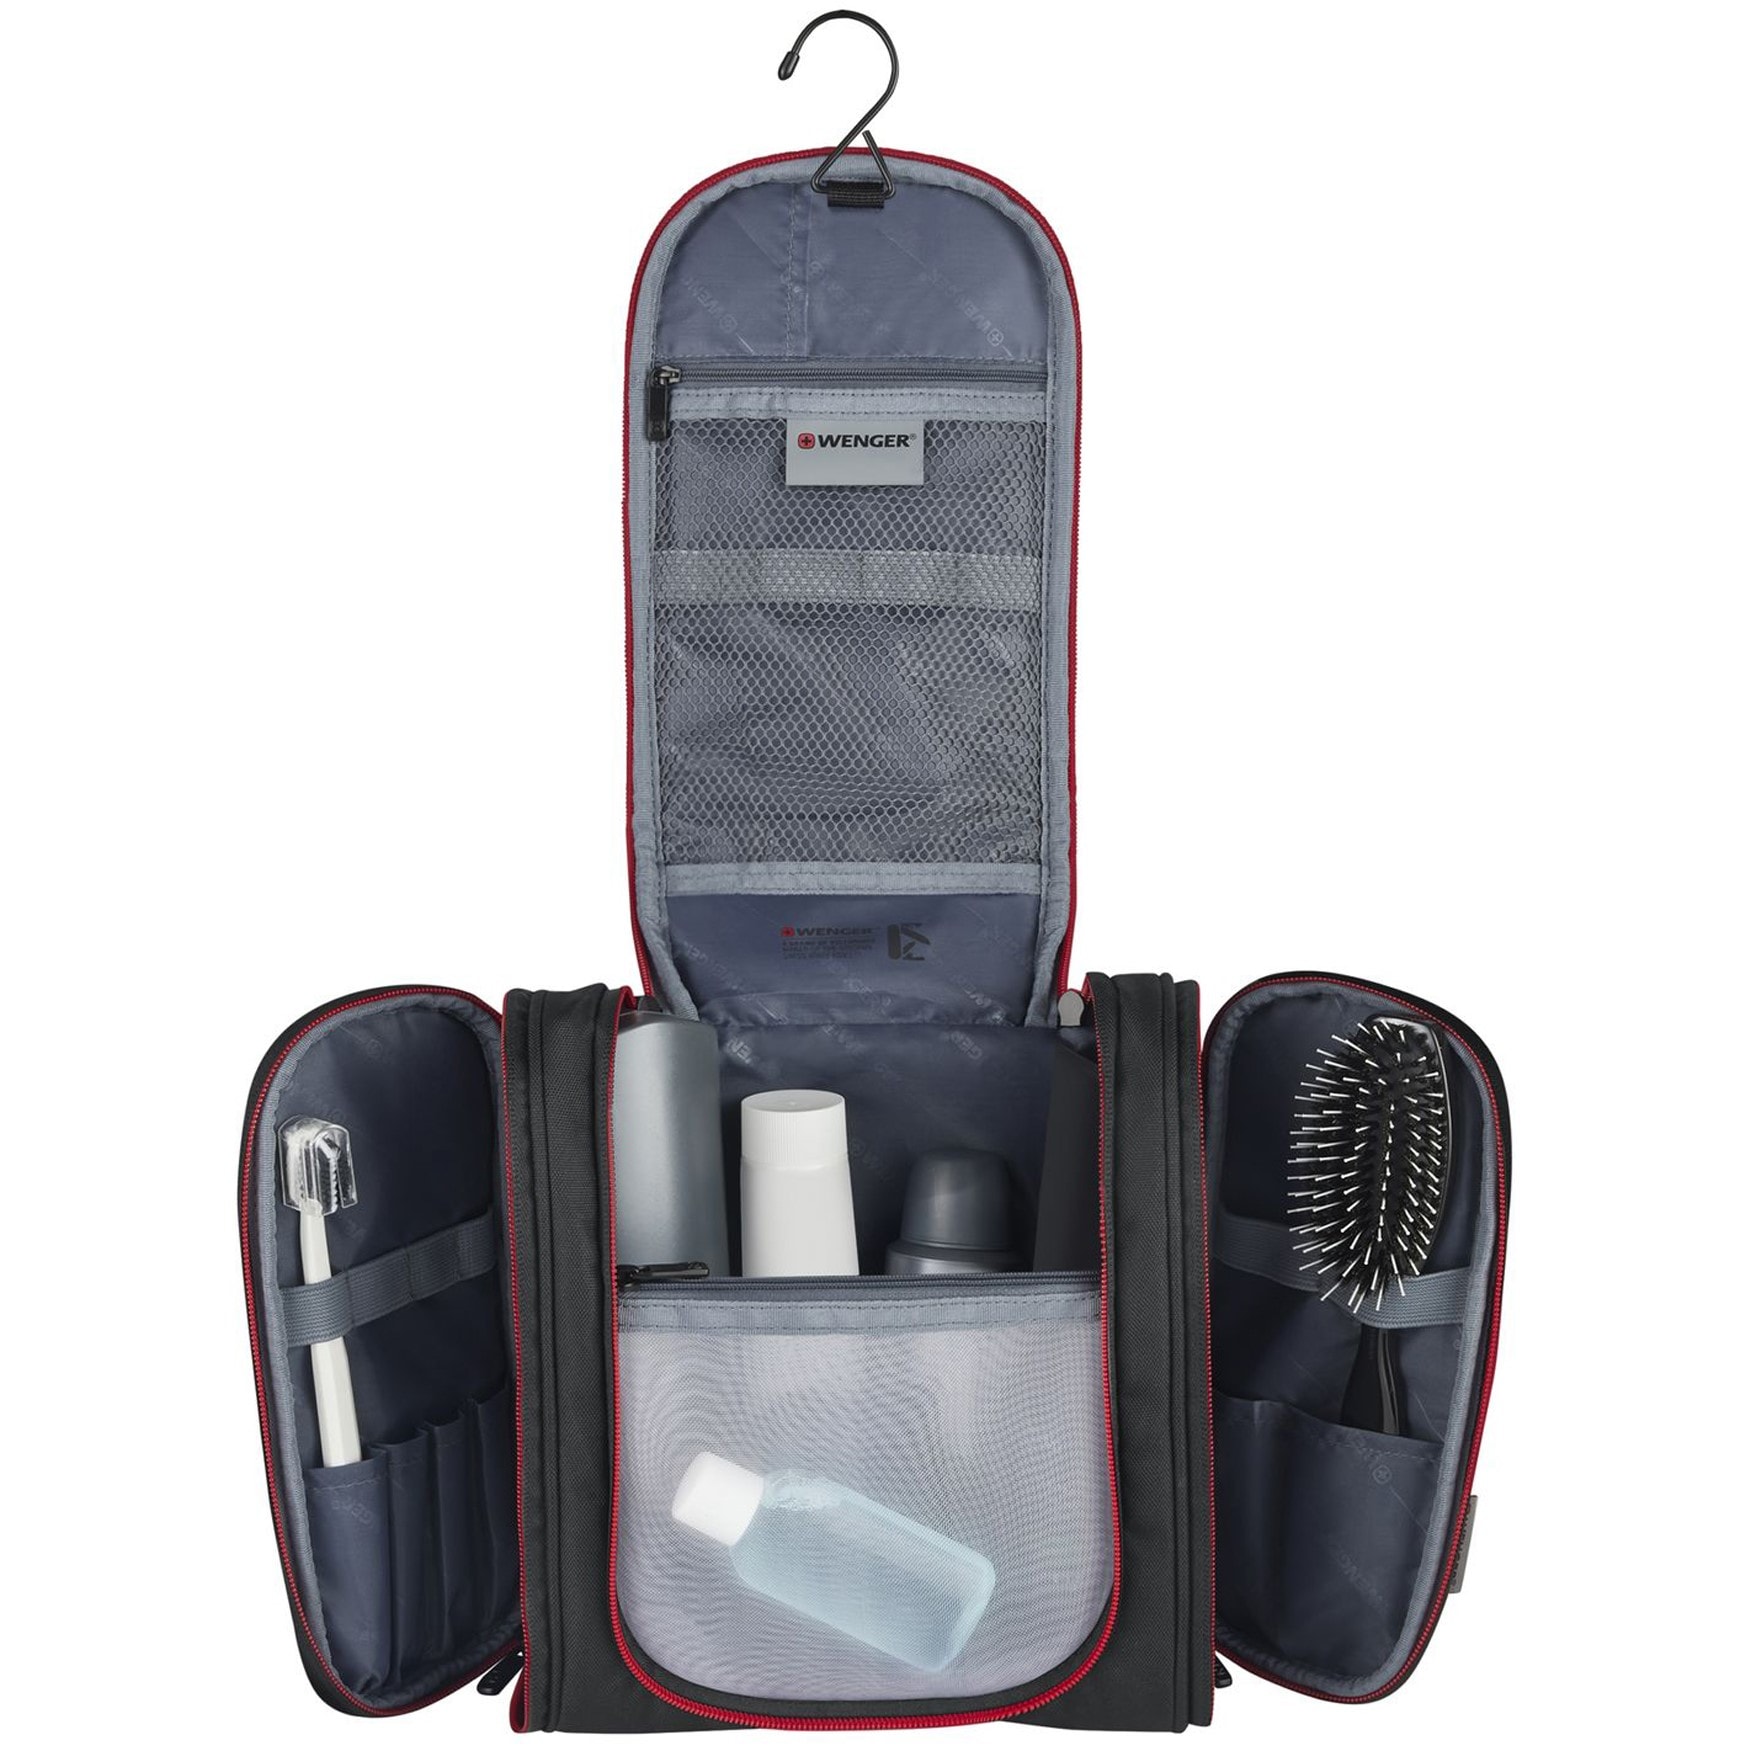 Косметичка Wenger Hanging Toiletry Kit - Black